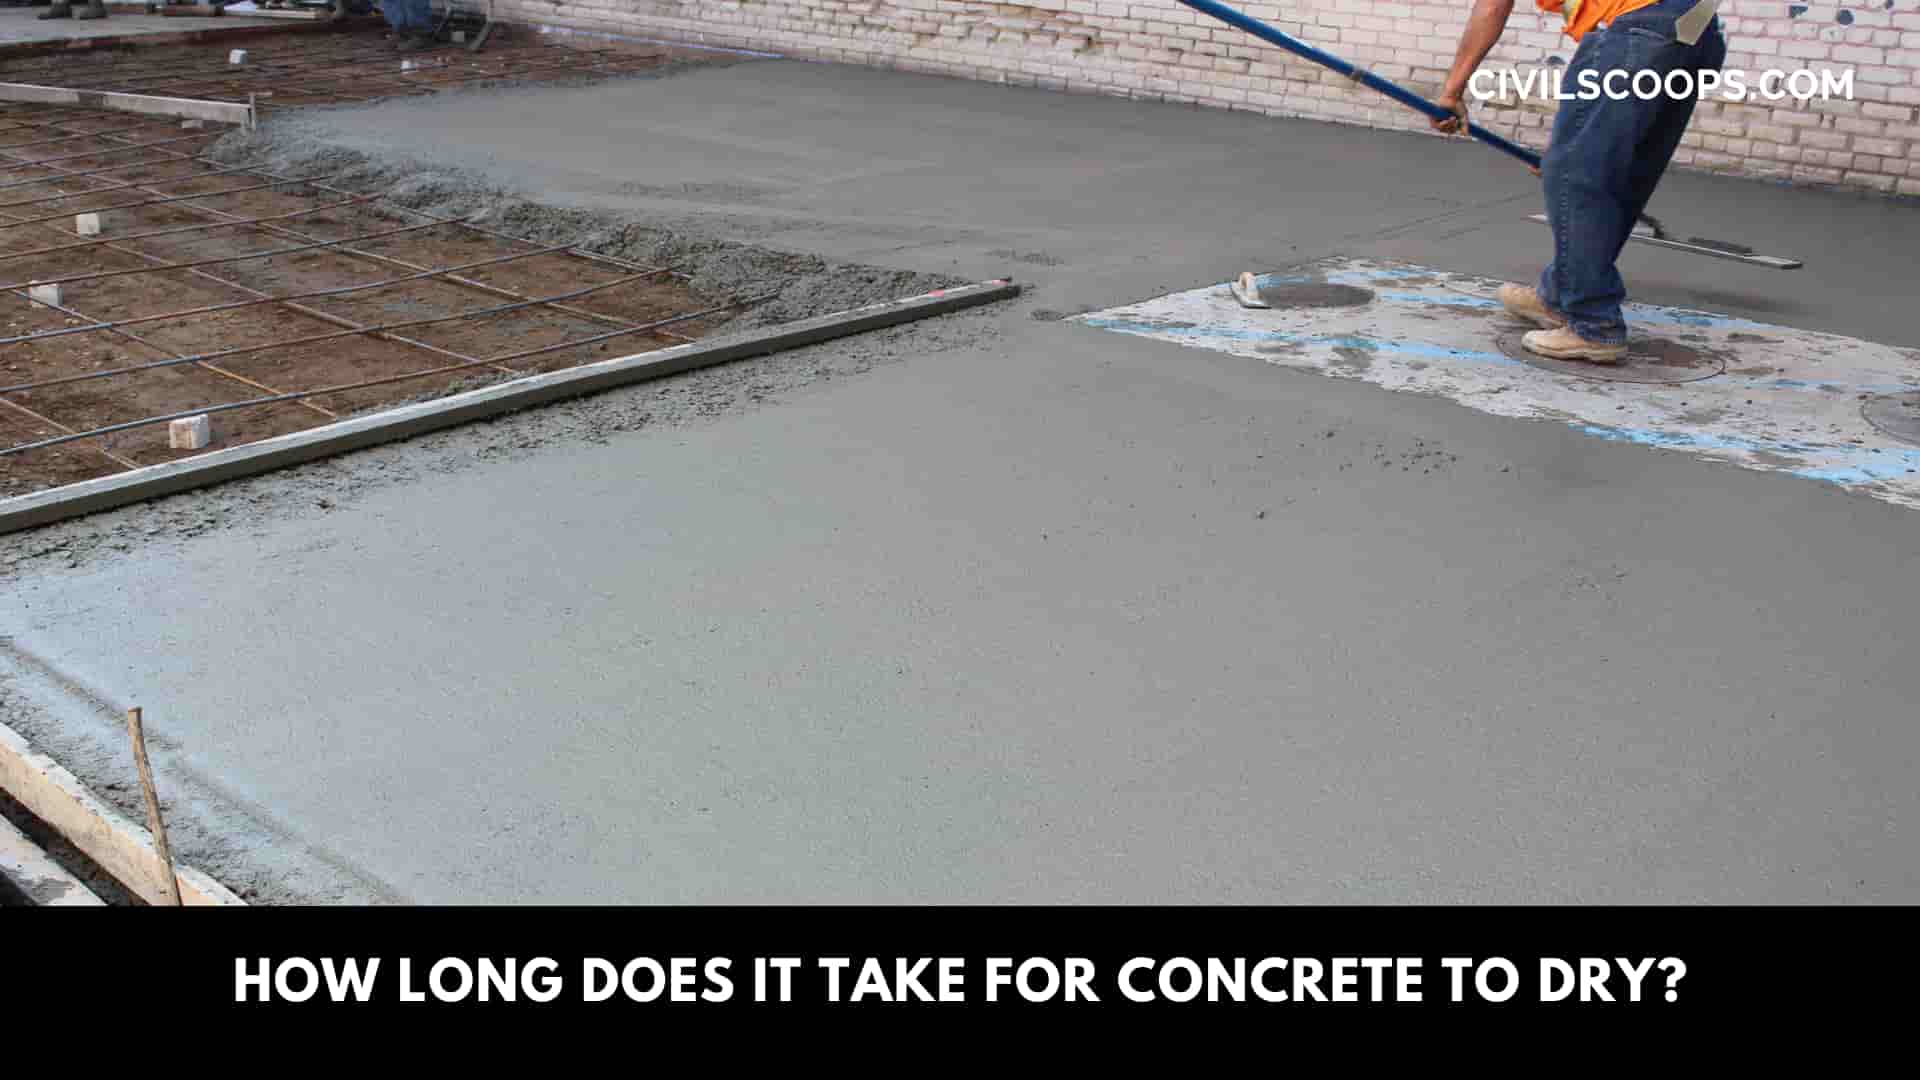 How Long Does It Take for Concrete to Dry